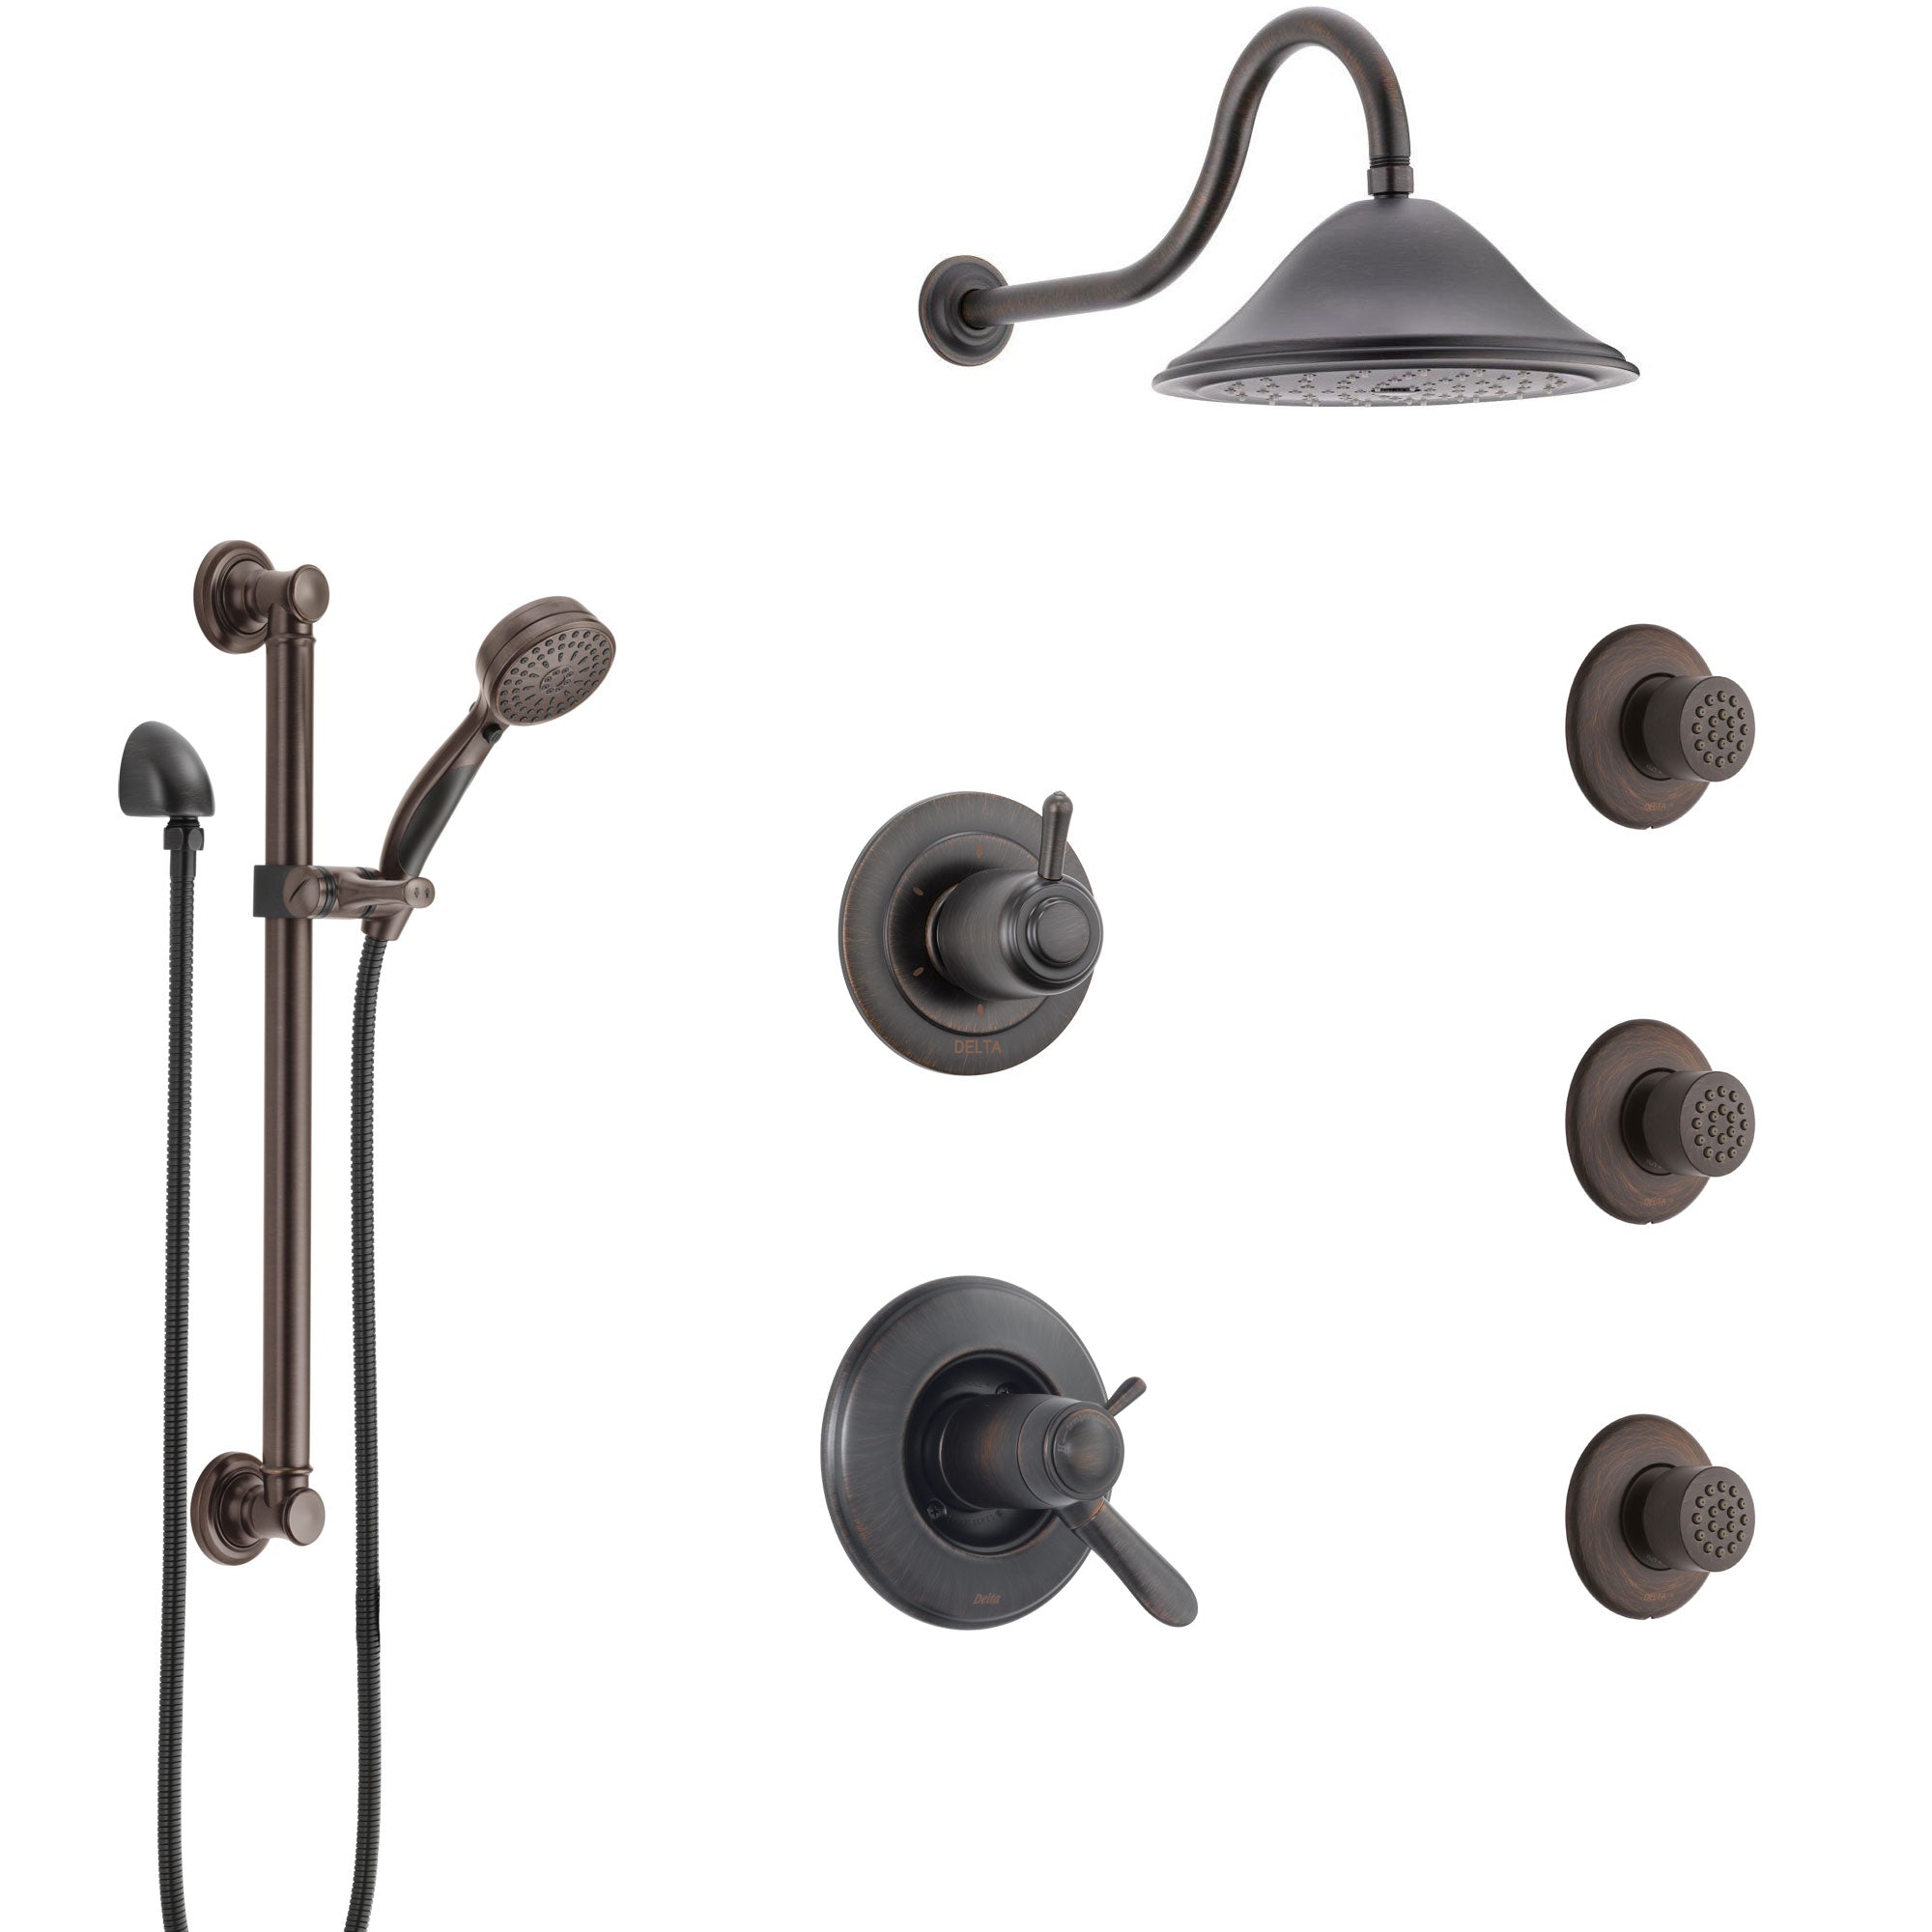 Delta Lahara Venetian Bronze Shower System with Dual Thermostatic Control, Diverter, Showerhead, 3 Body Sprays, and Grab Bar Hand Shower SS17T382RB5